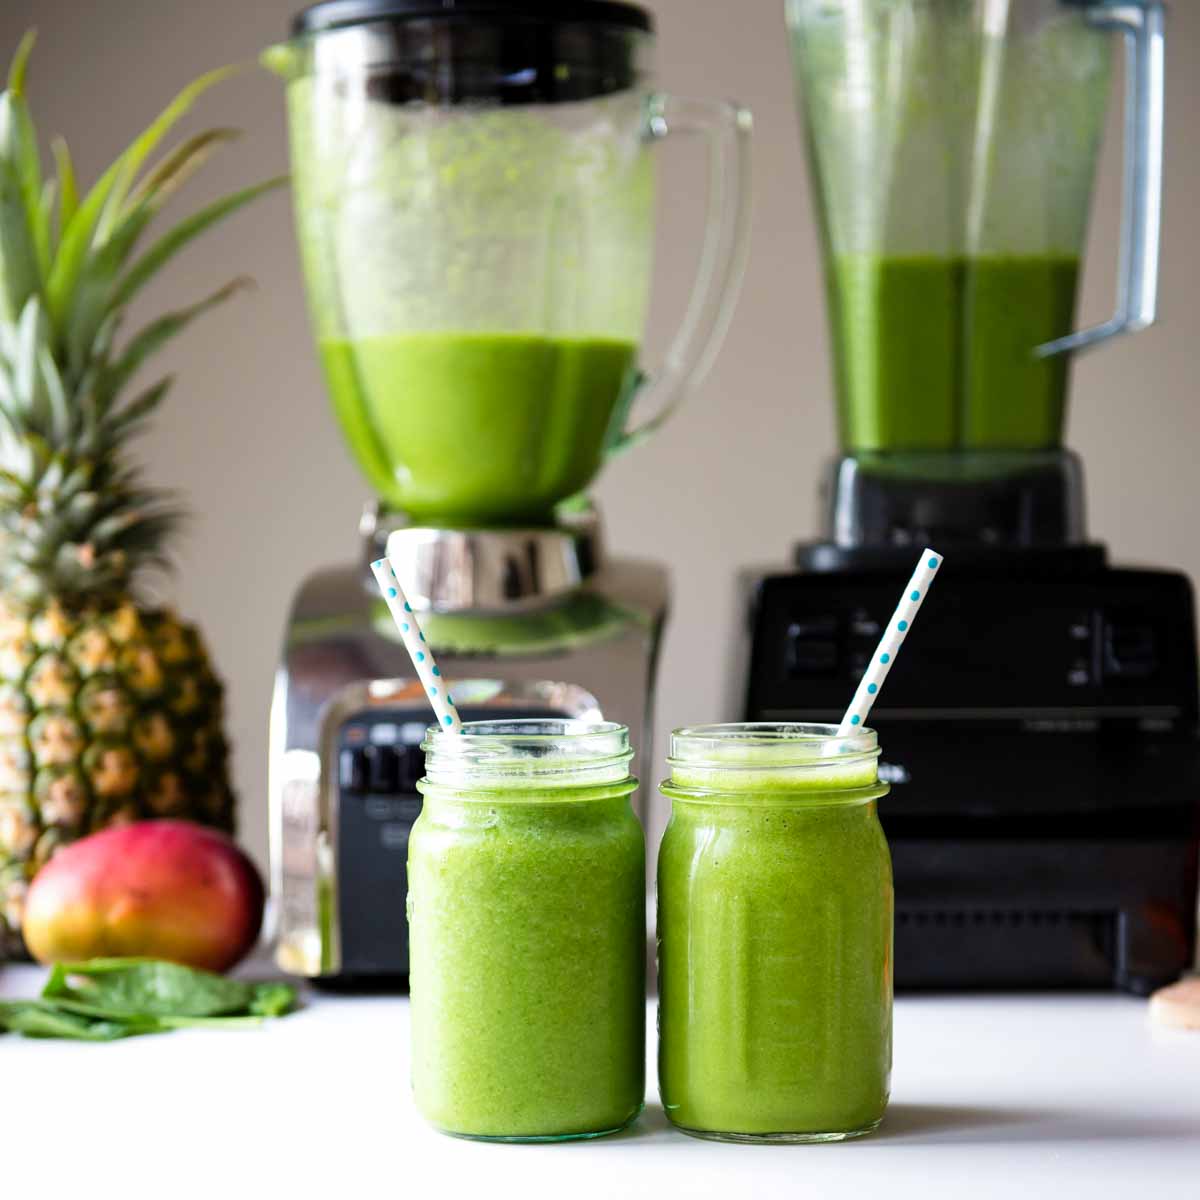 https://simplegreensmoothies.com/wp-content/uploads/Best-Blenders-for-Smoothies-results.jpg